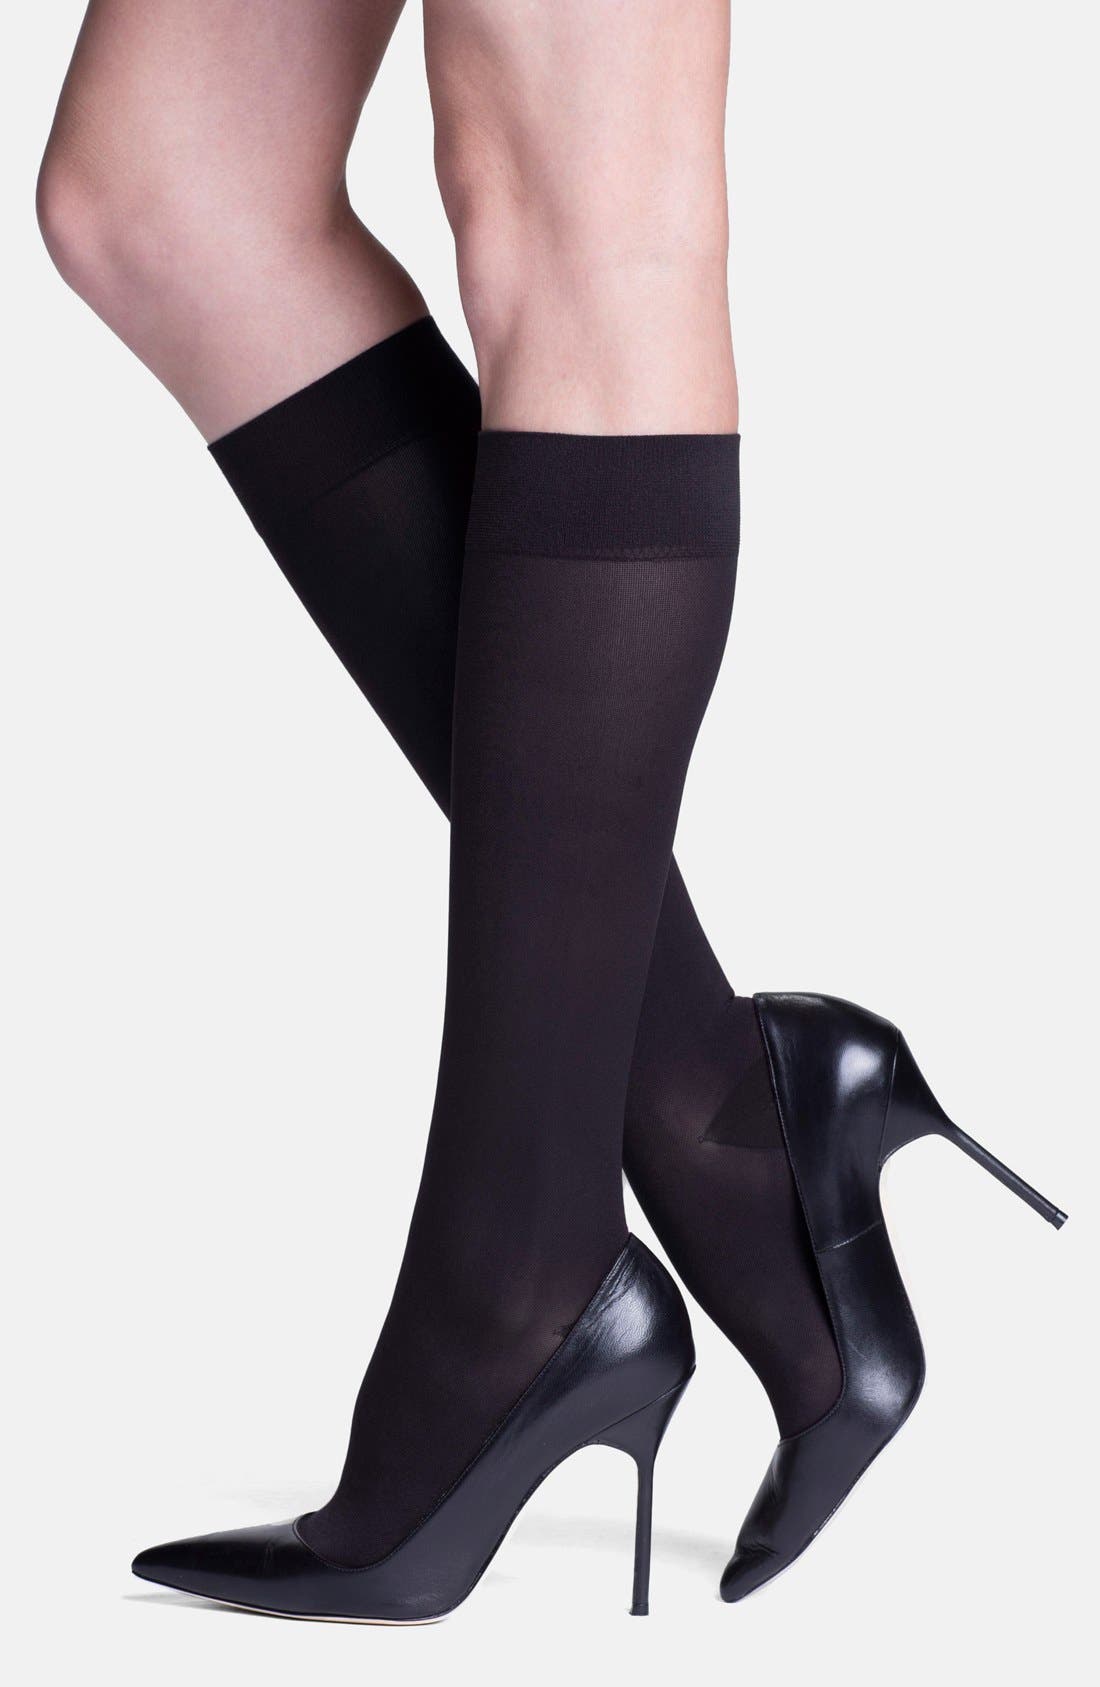 UPC 745129214791 product image for INSIGNIA by SIGVARIS 'Headliner' Graduated Compression Knee High Socks Black A | upcitemdb.com